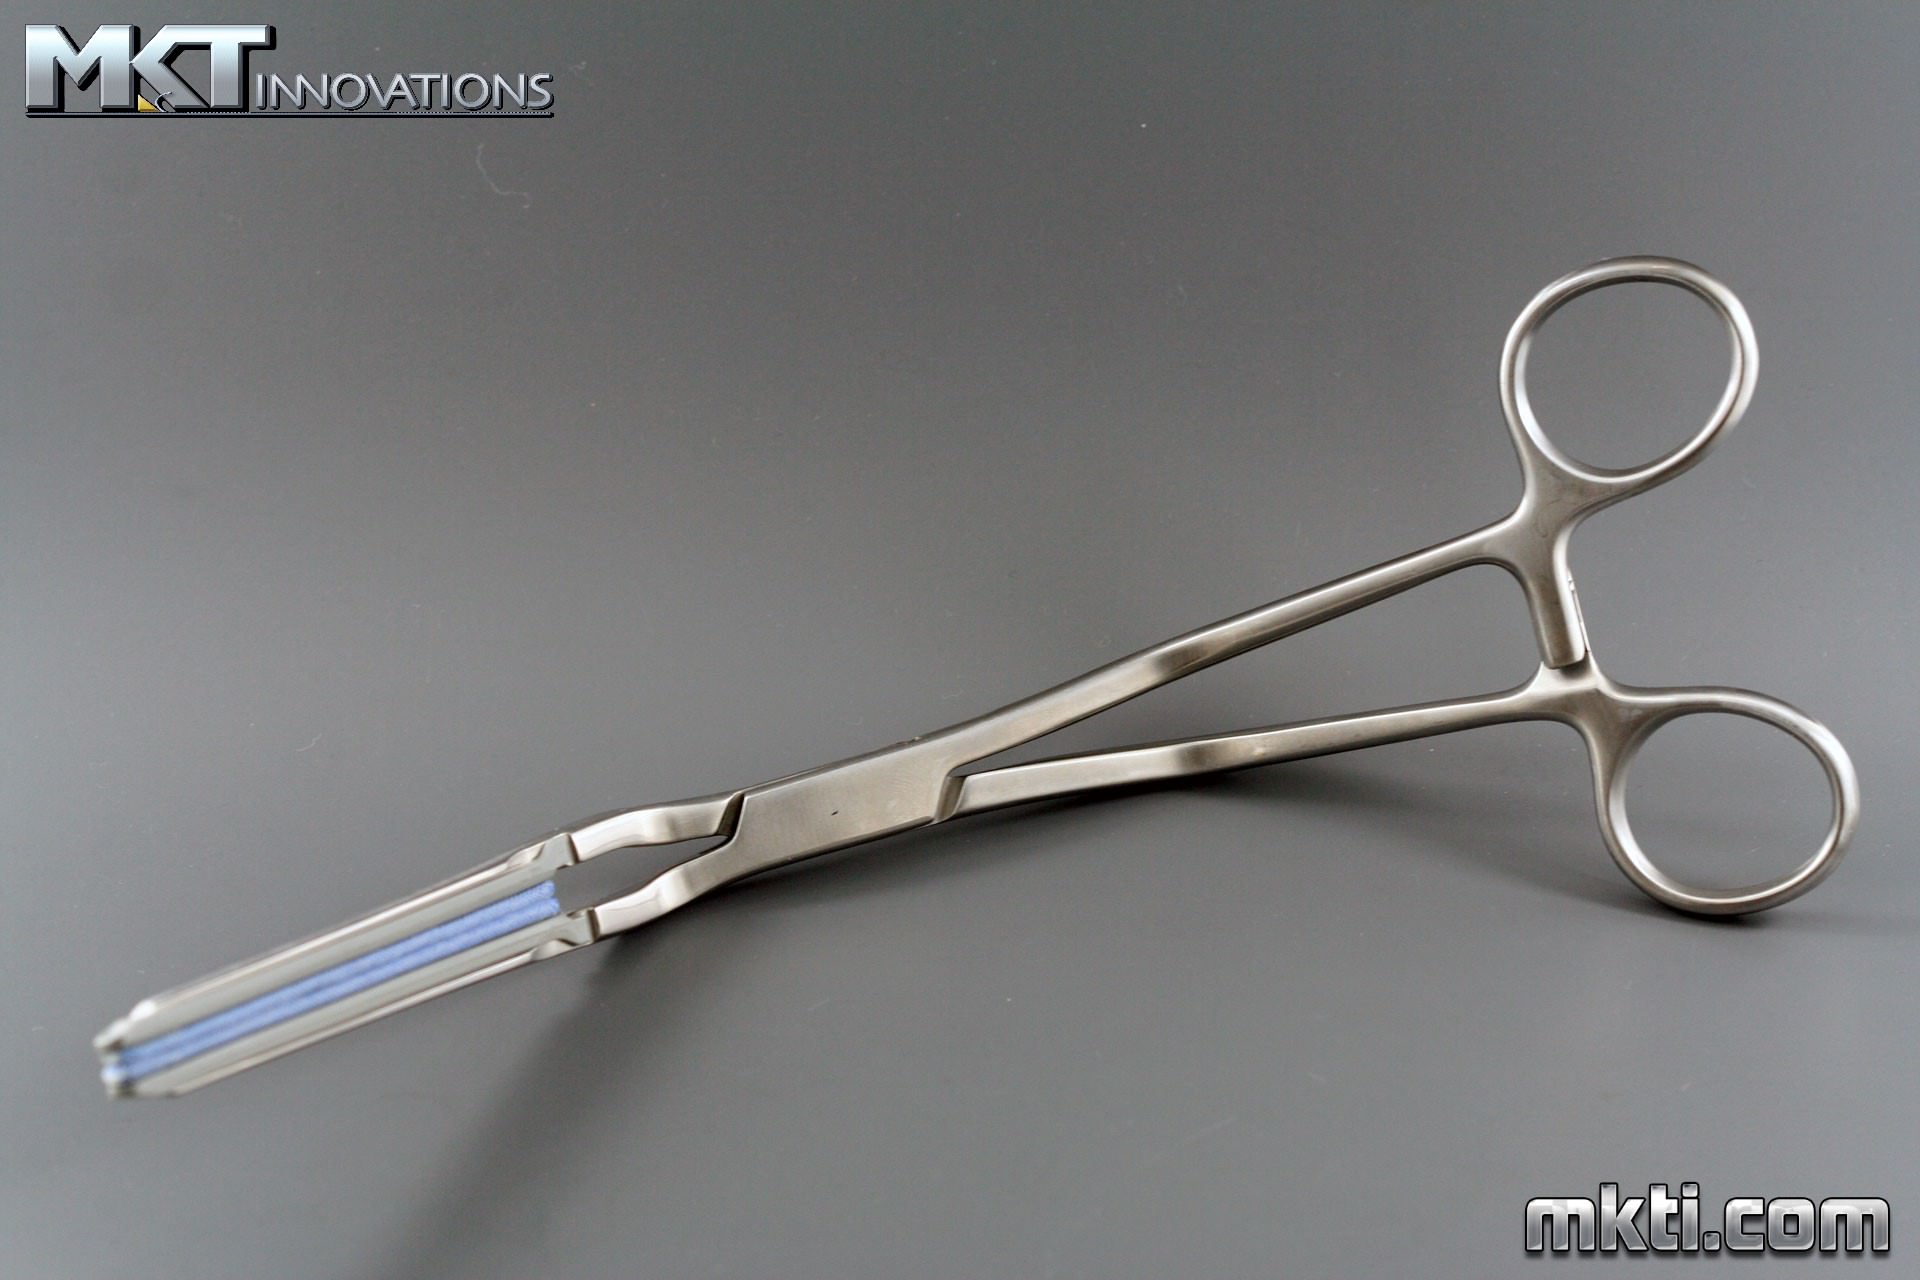 Surgical Clamp